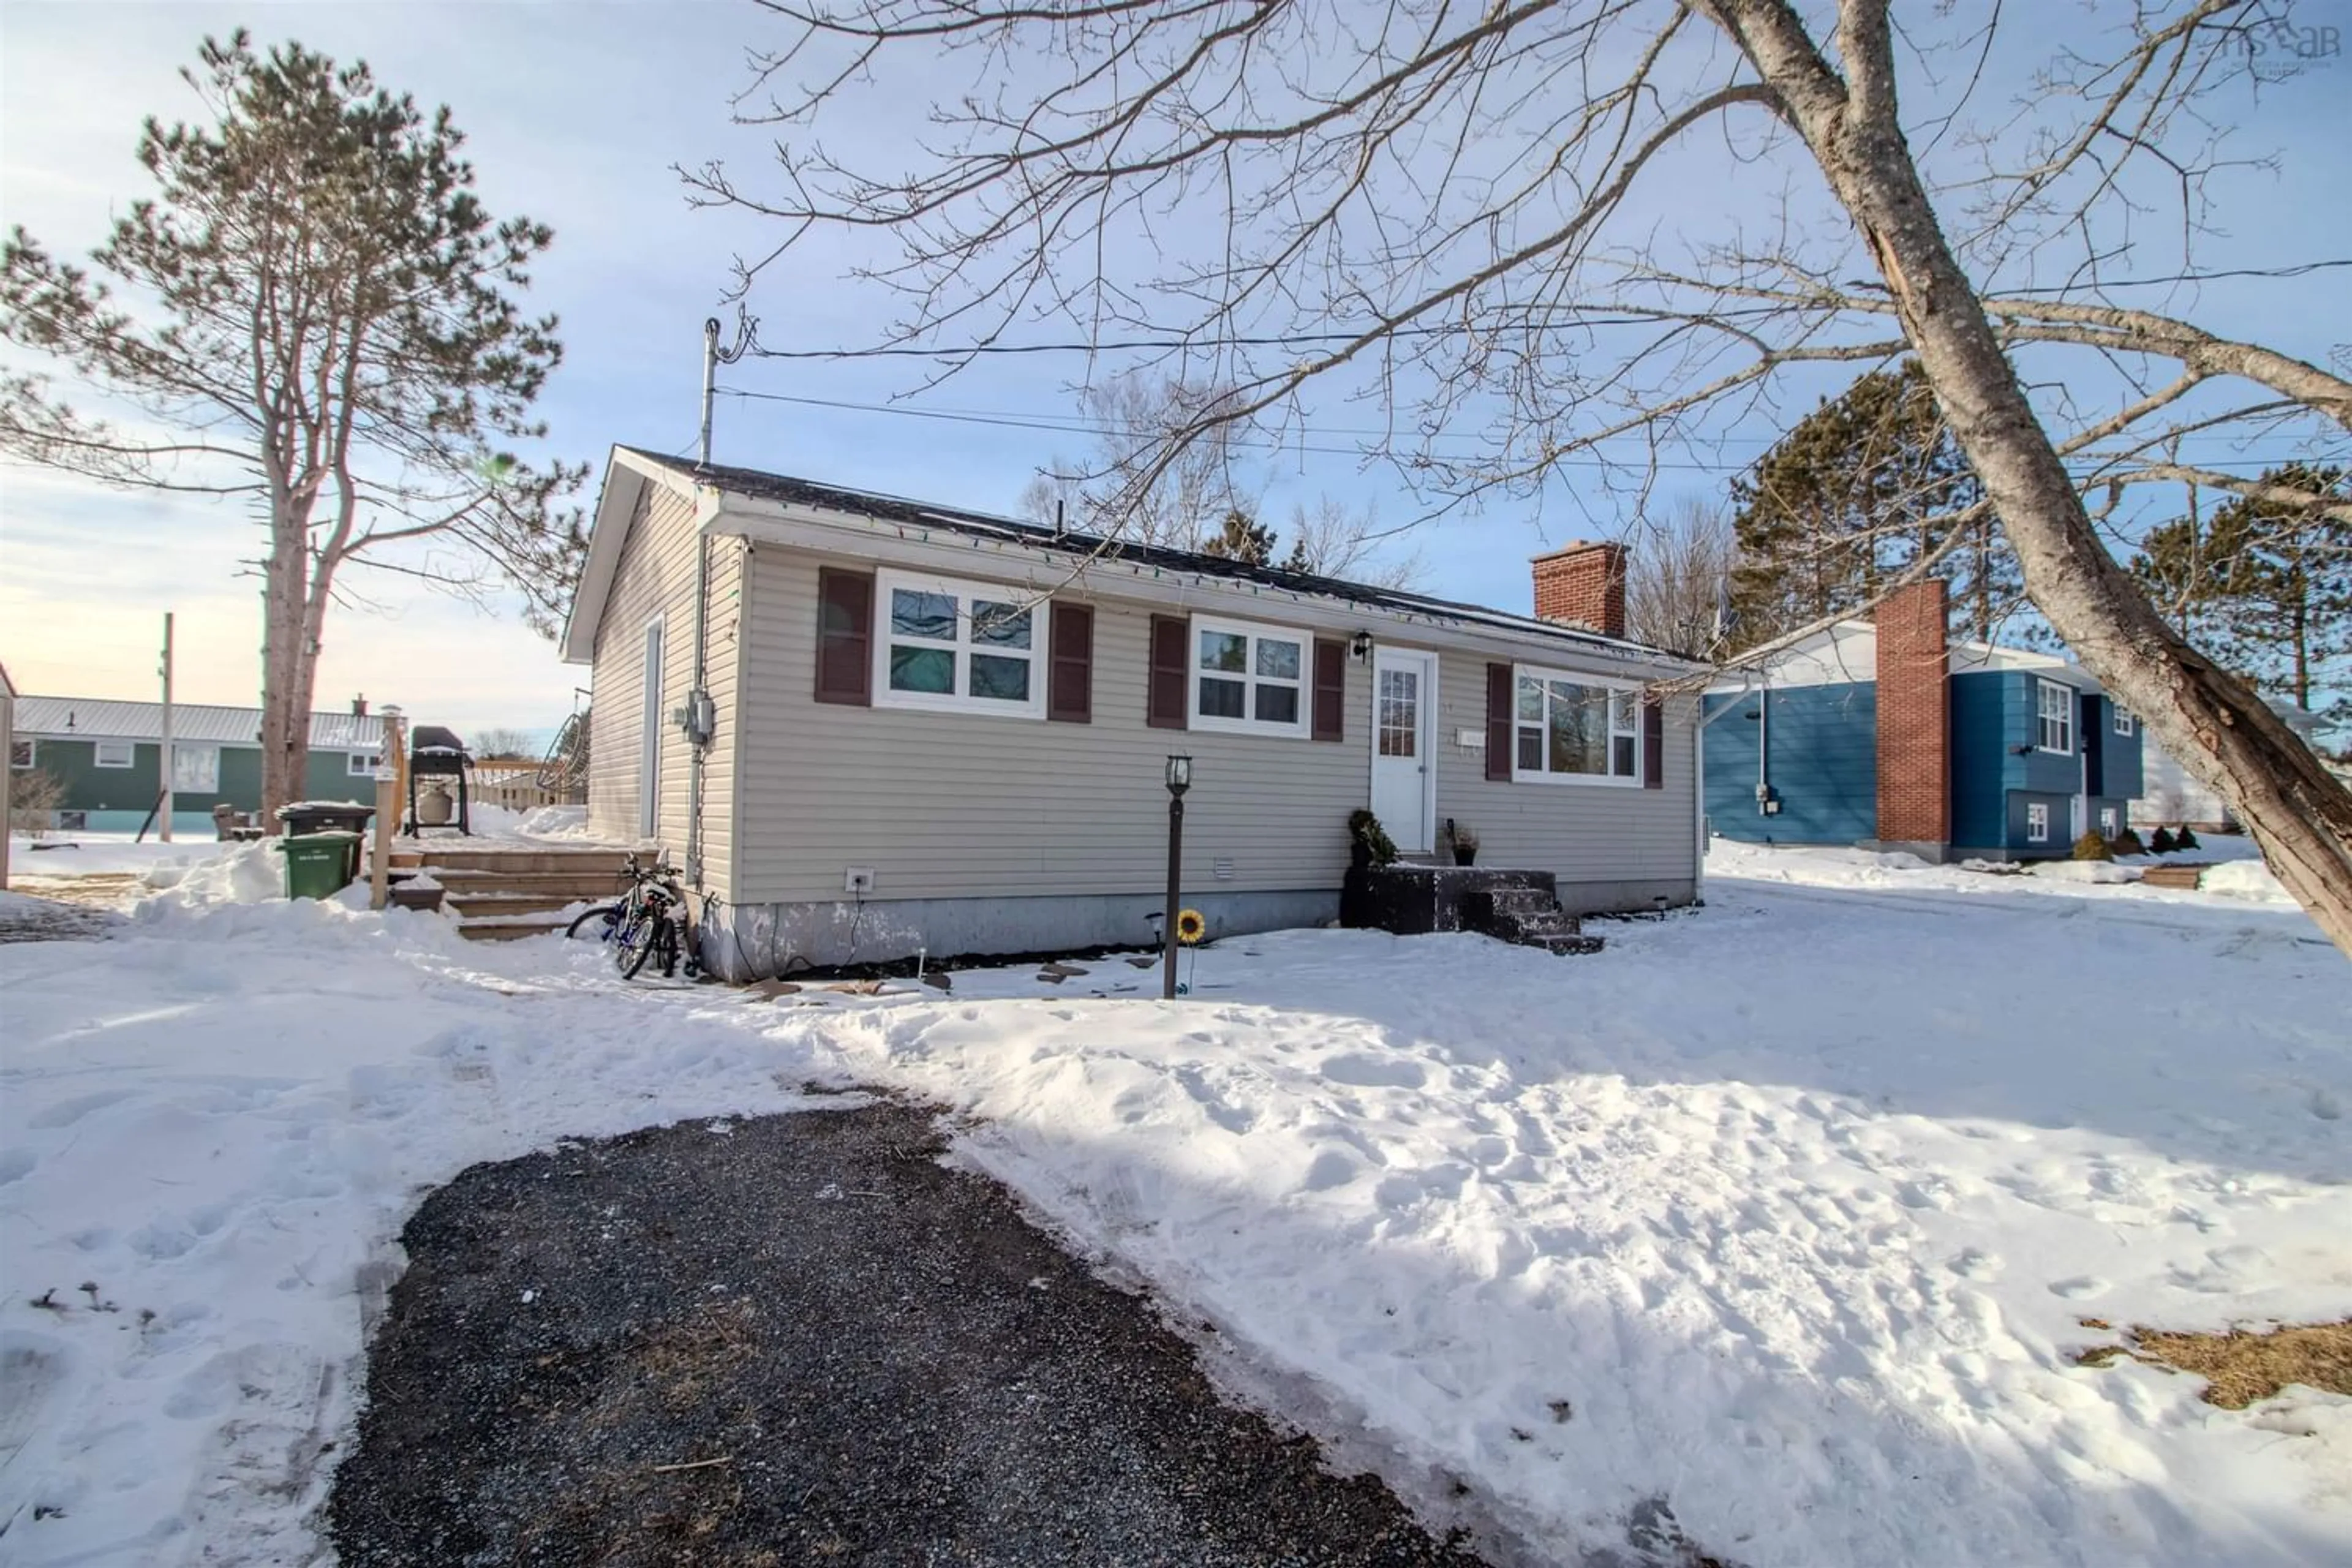 Home with unknown exterior material for 58 Scenic Dr, Bible Hill Nova Scotia B2N 4N5